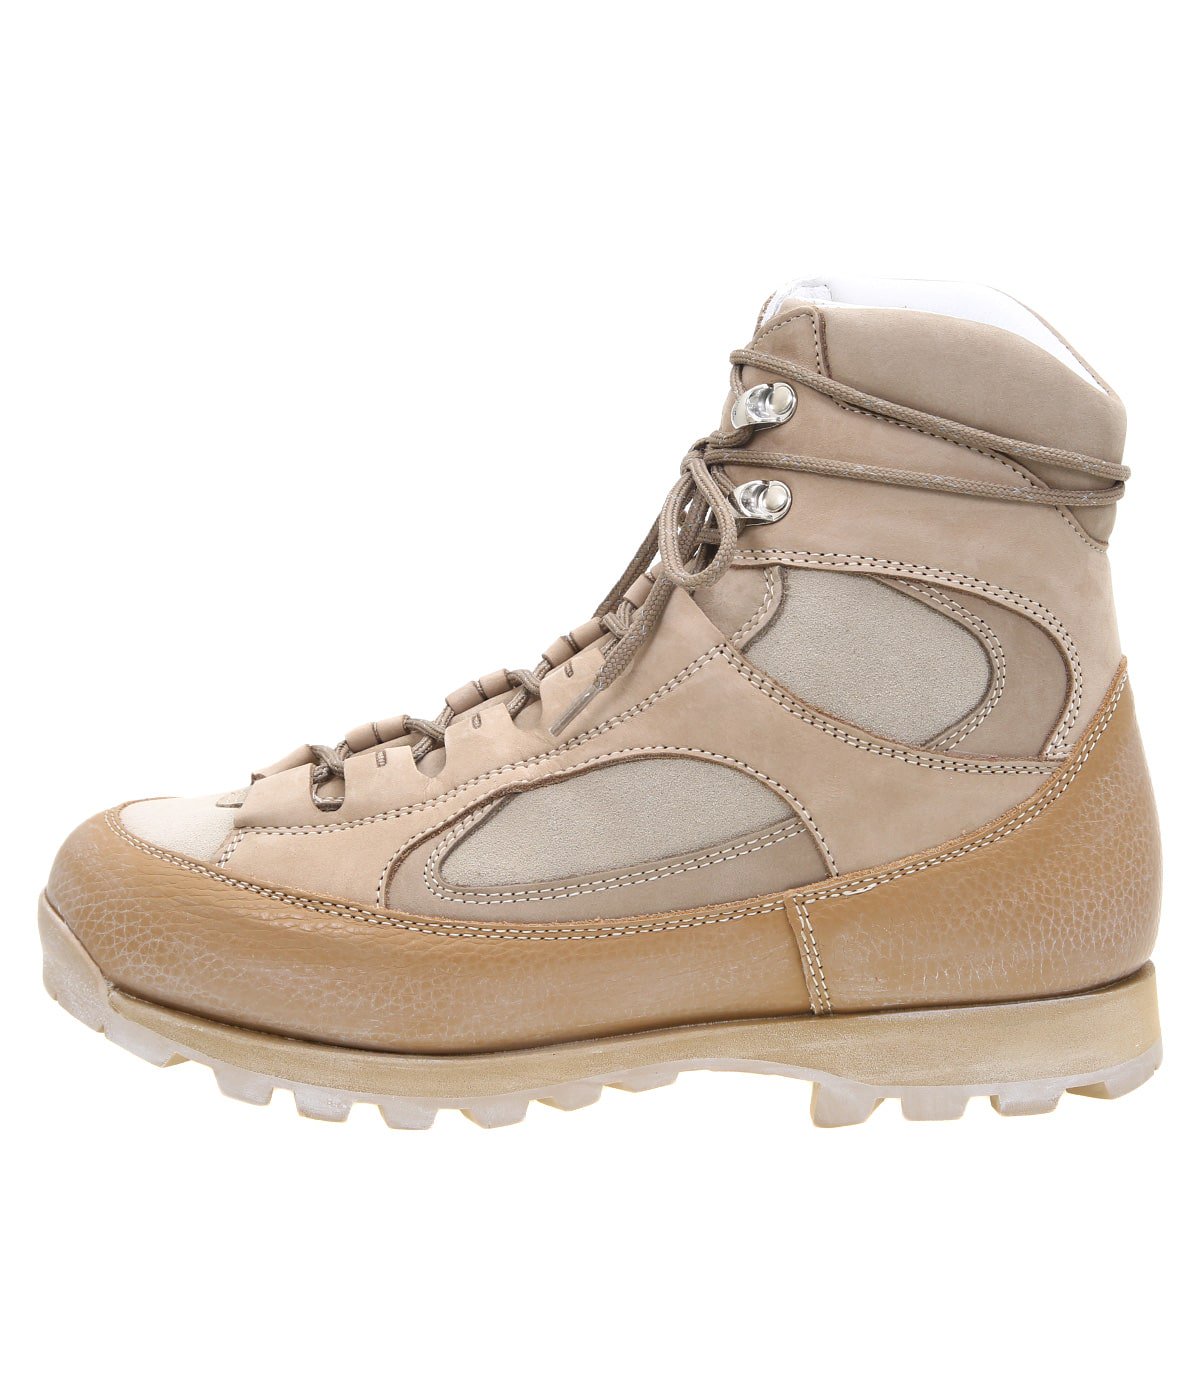 ALPINIST BOOTS COW LEATHER: nonnative(ノンネイティブ): MEN WOMEN - ARKnets(アーク